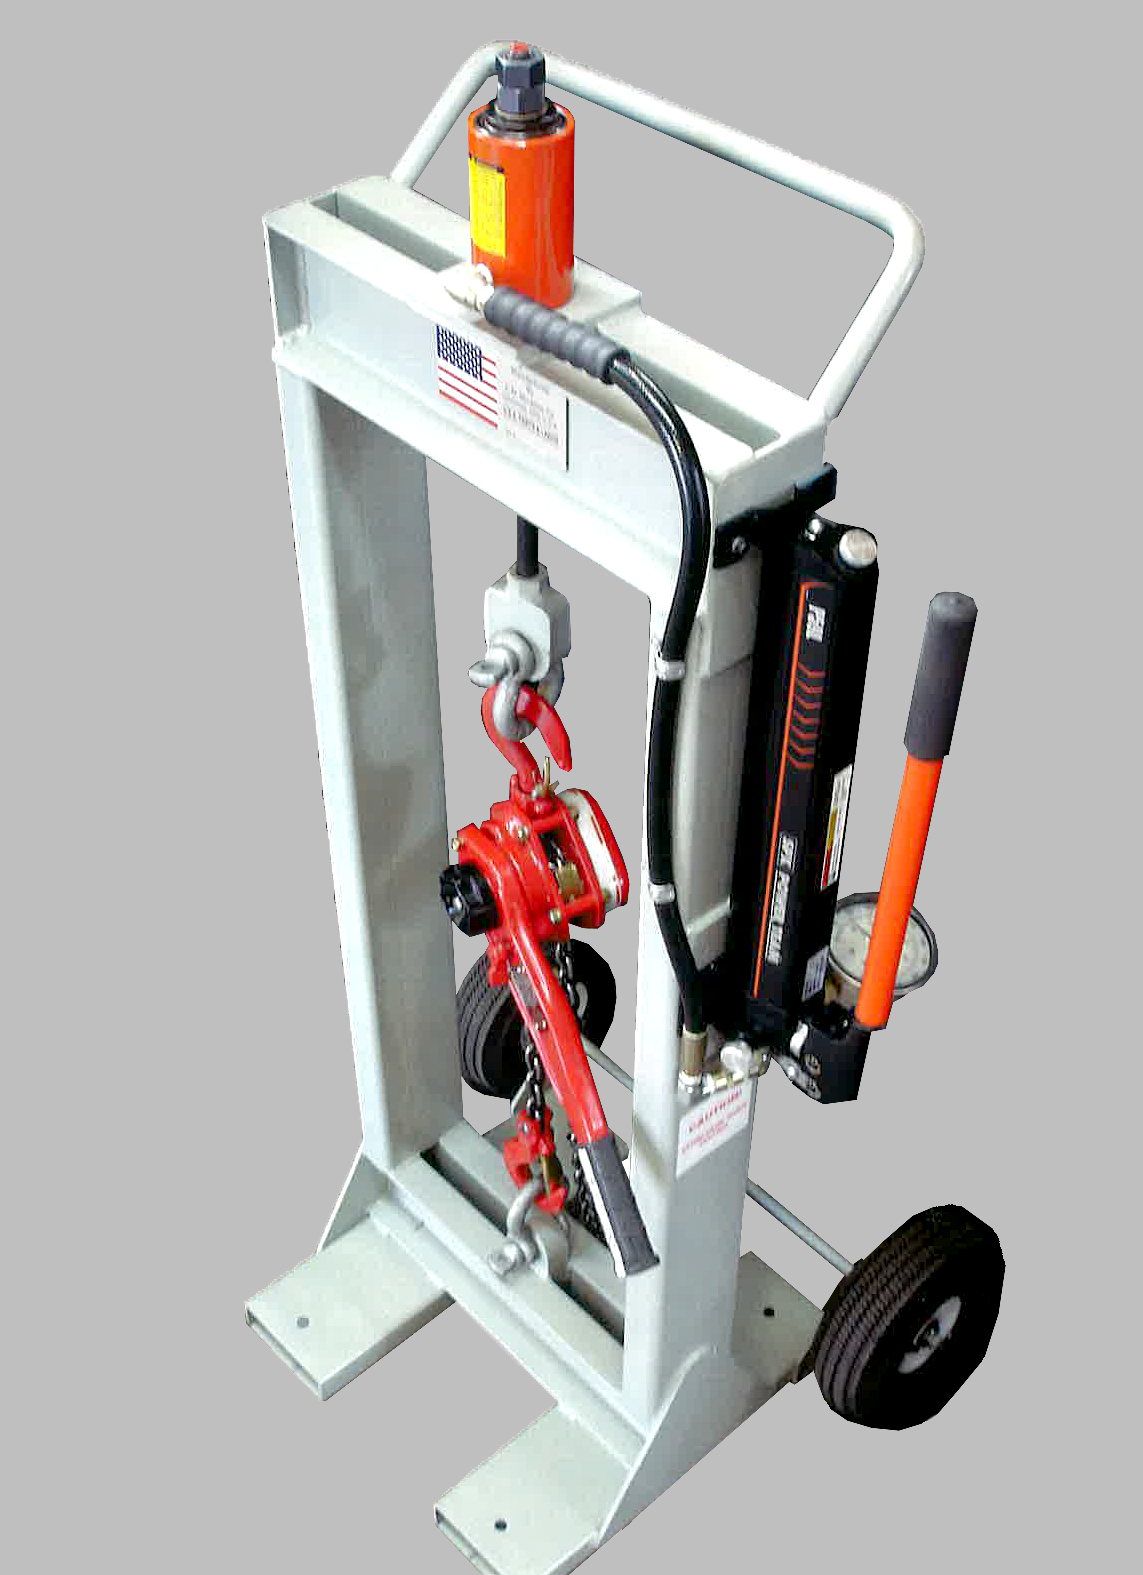 //pridetool.com/wp-content/uploads/2023/05/6-Ton-Pride-Tool-Hoist-and-Lift-Sling-Test-Stand-GrayBG.png